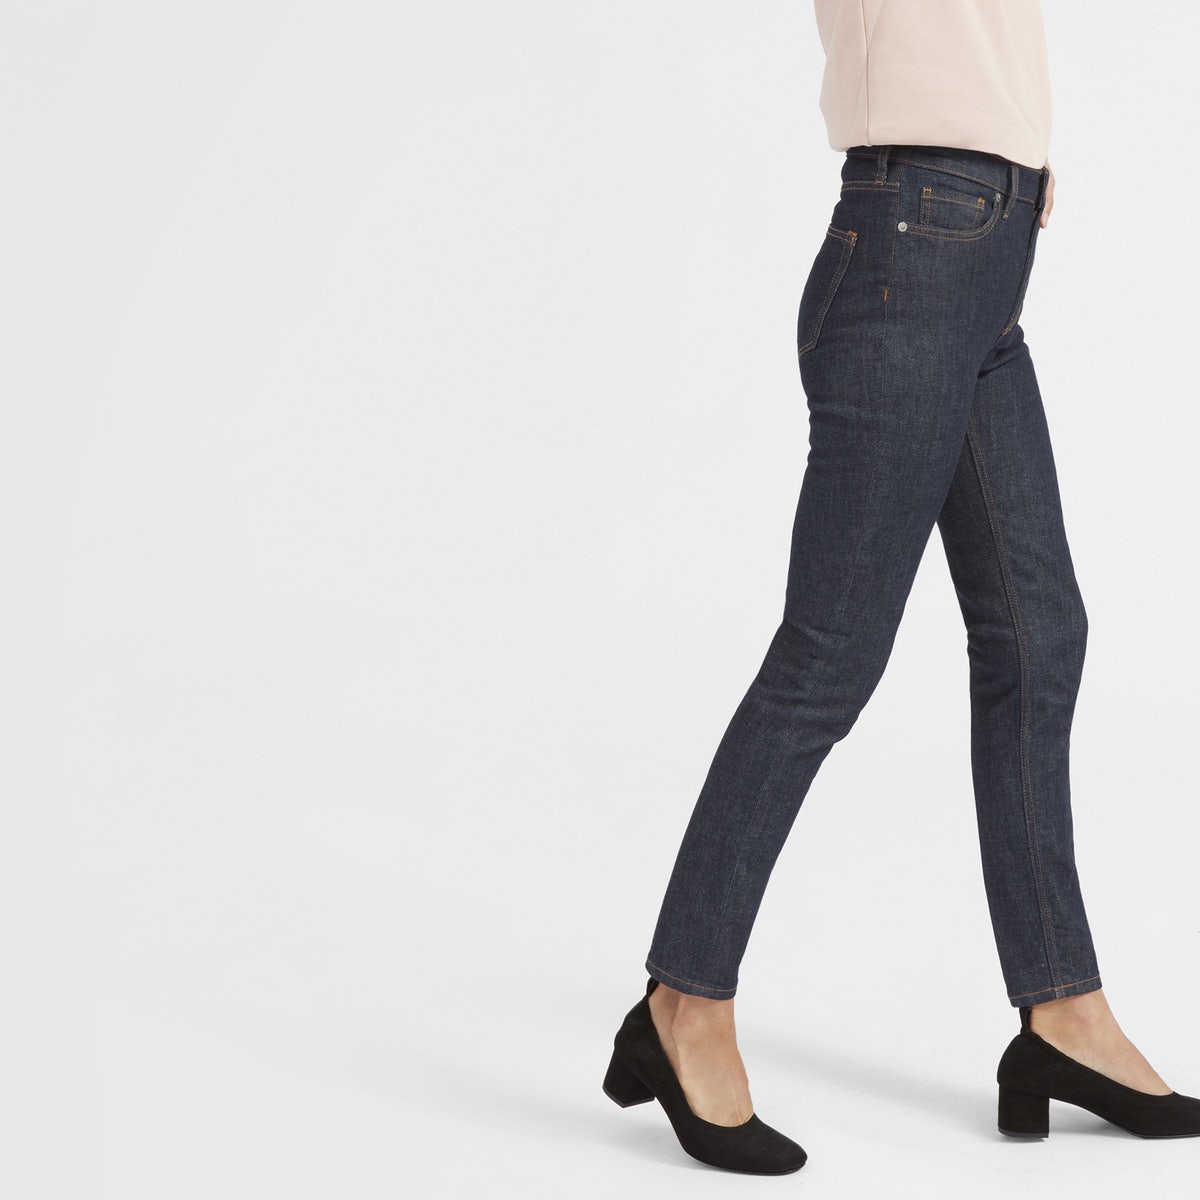 Everlane High Rise Skinny Jeans, as worn by a model.